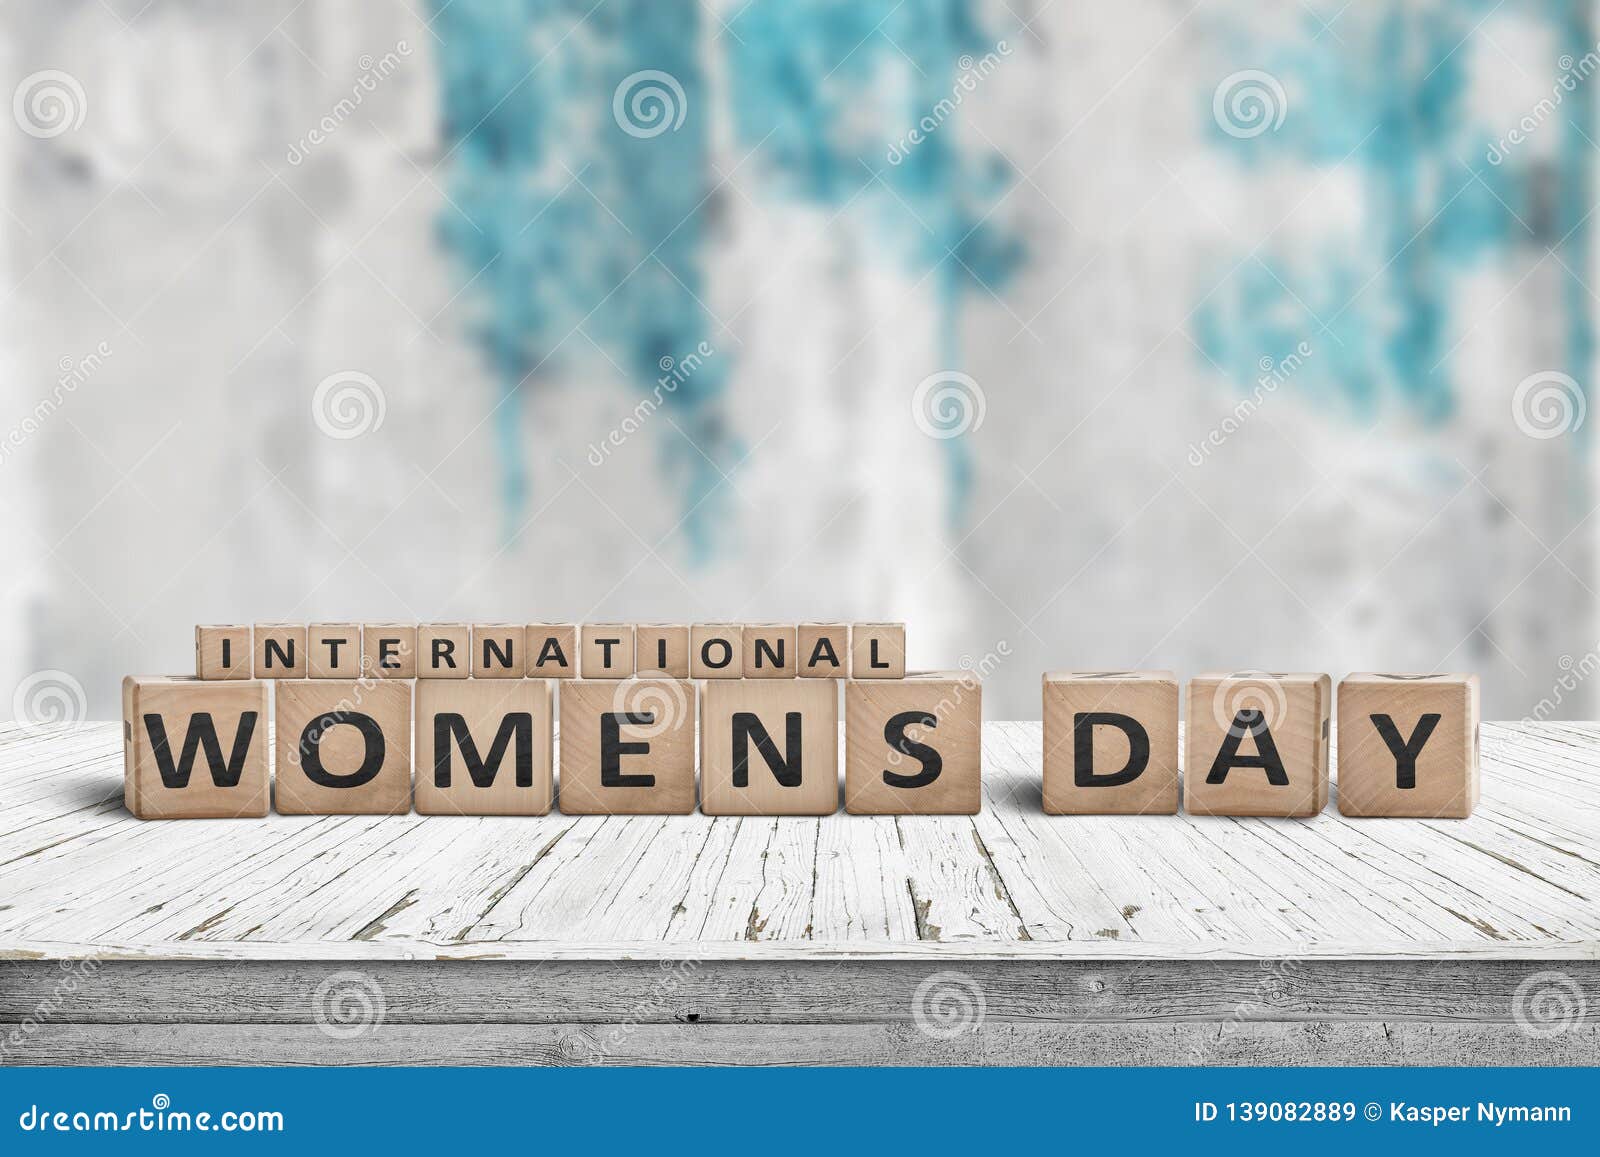 international womens day sign on a wooden table